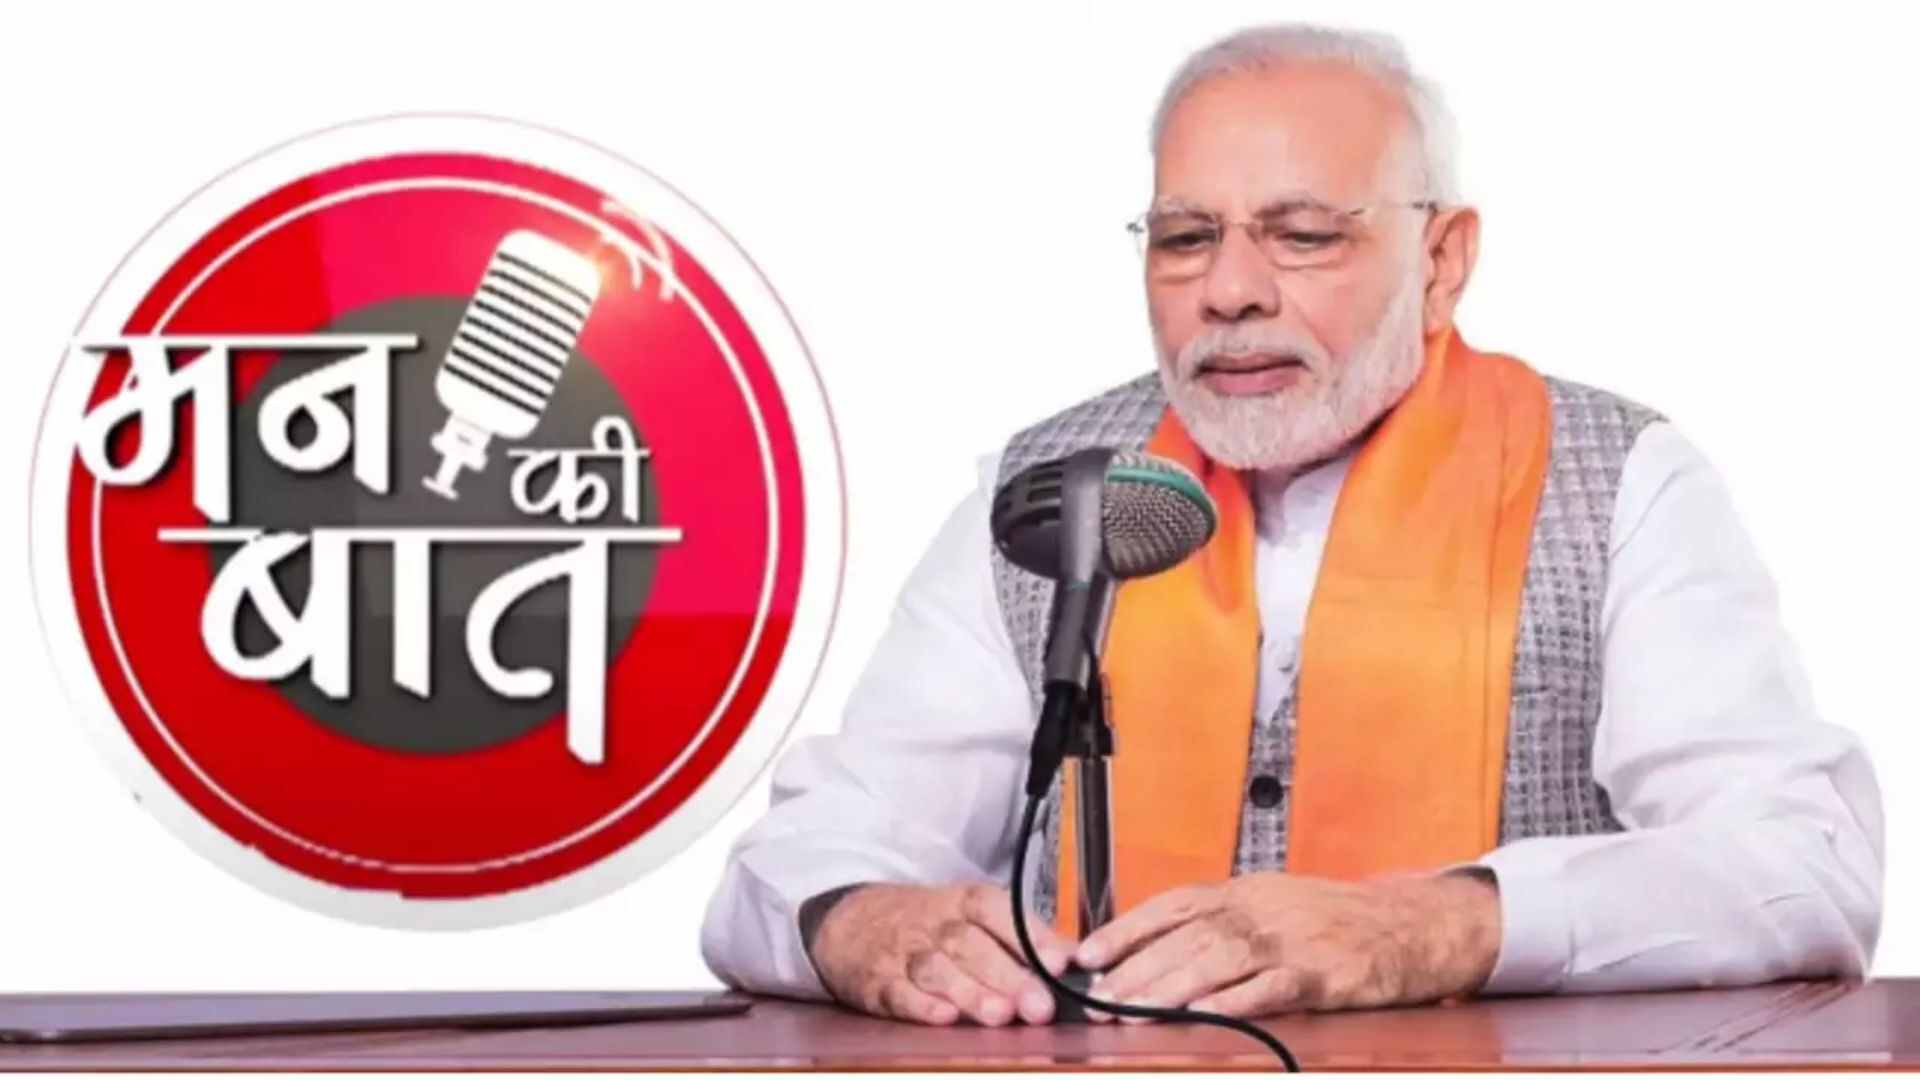 First ‘Mann Ki Baat’ Episode Of Third Term Of PM Modi On June 30; This Is How You Can Give Suggestions